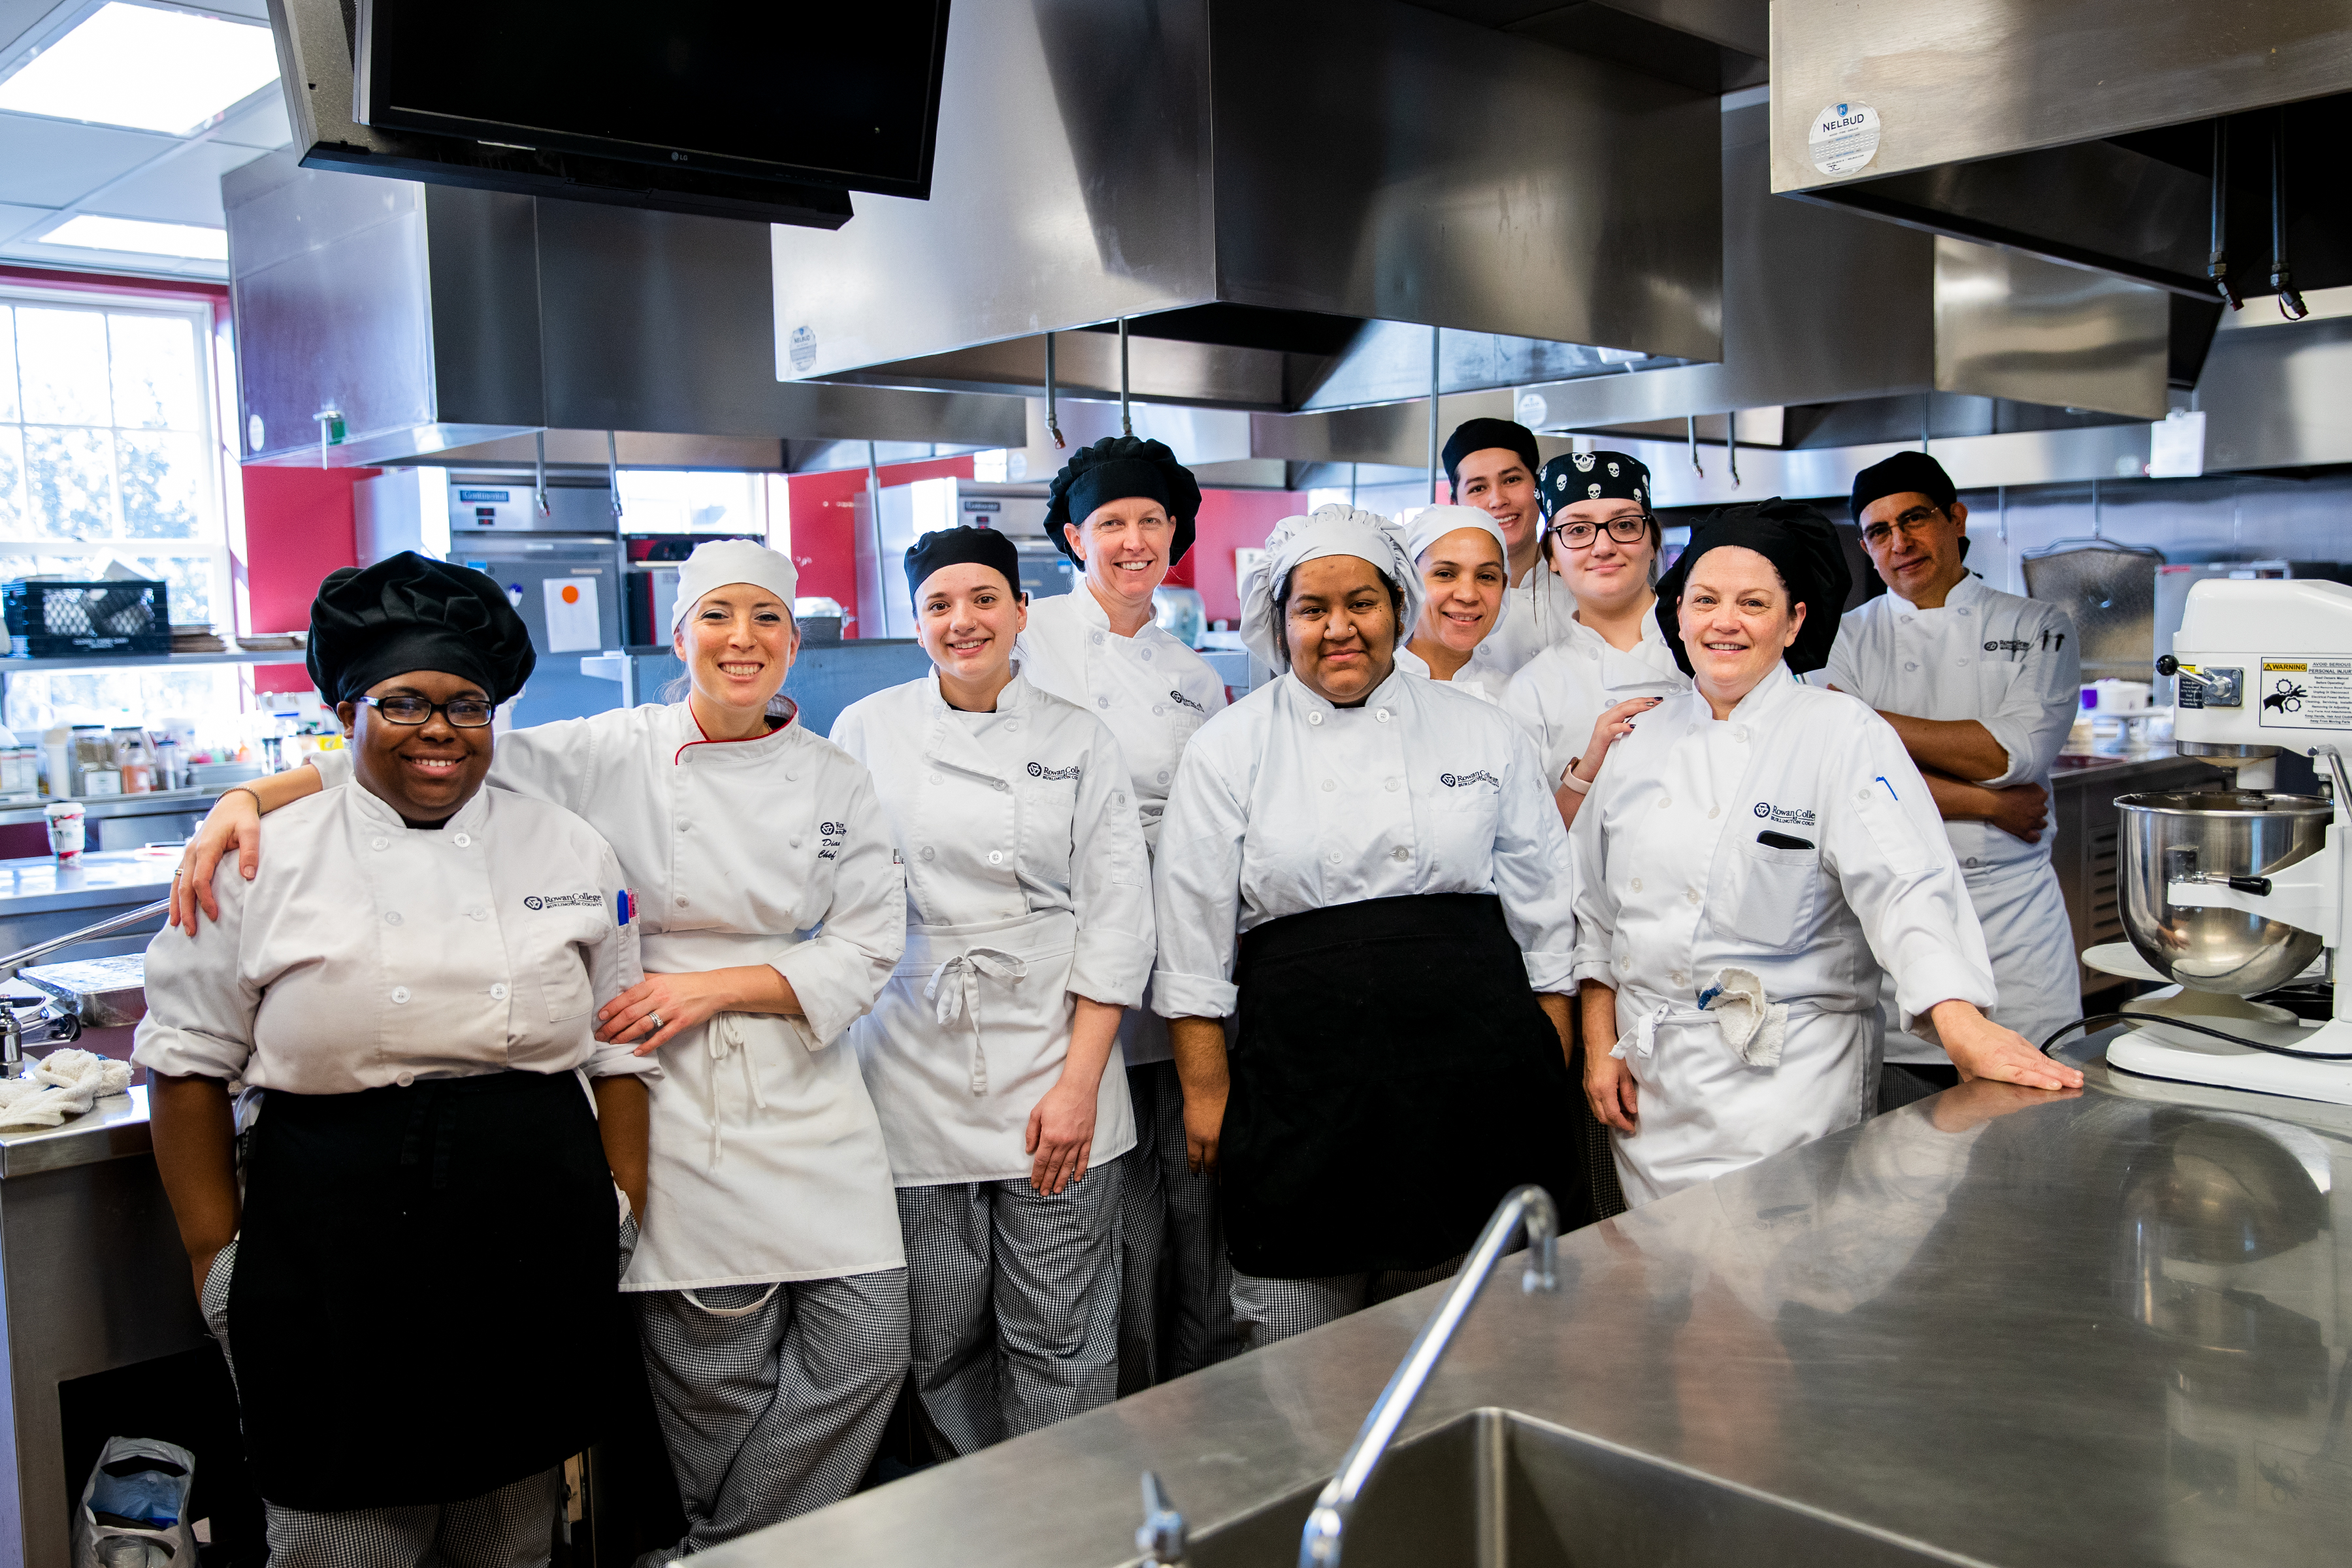 culinary students standing side-by-side in RCBC kitchen